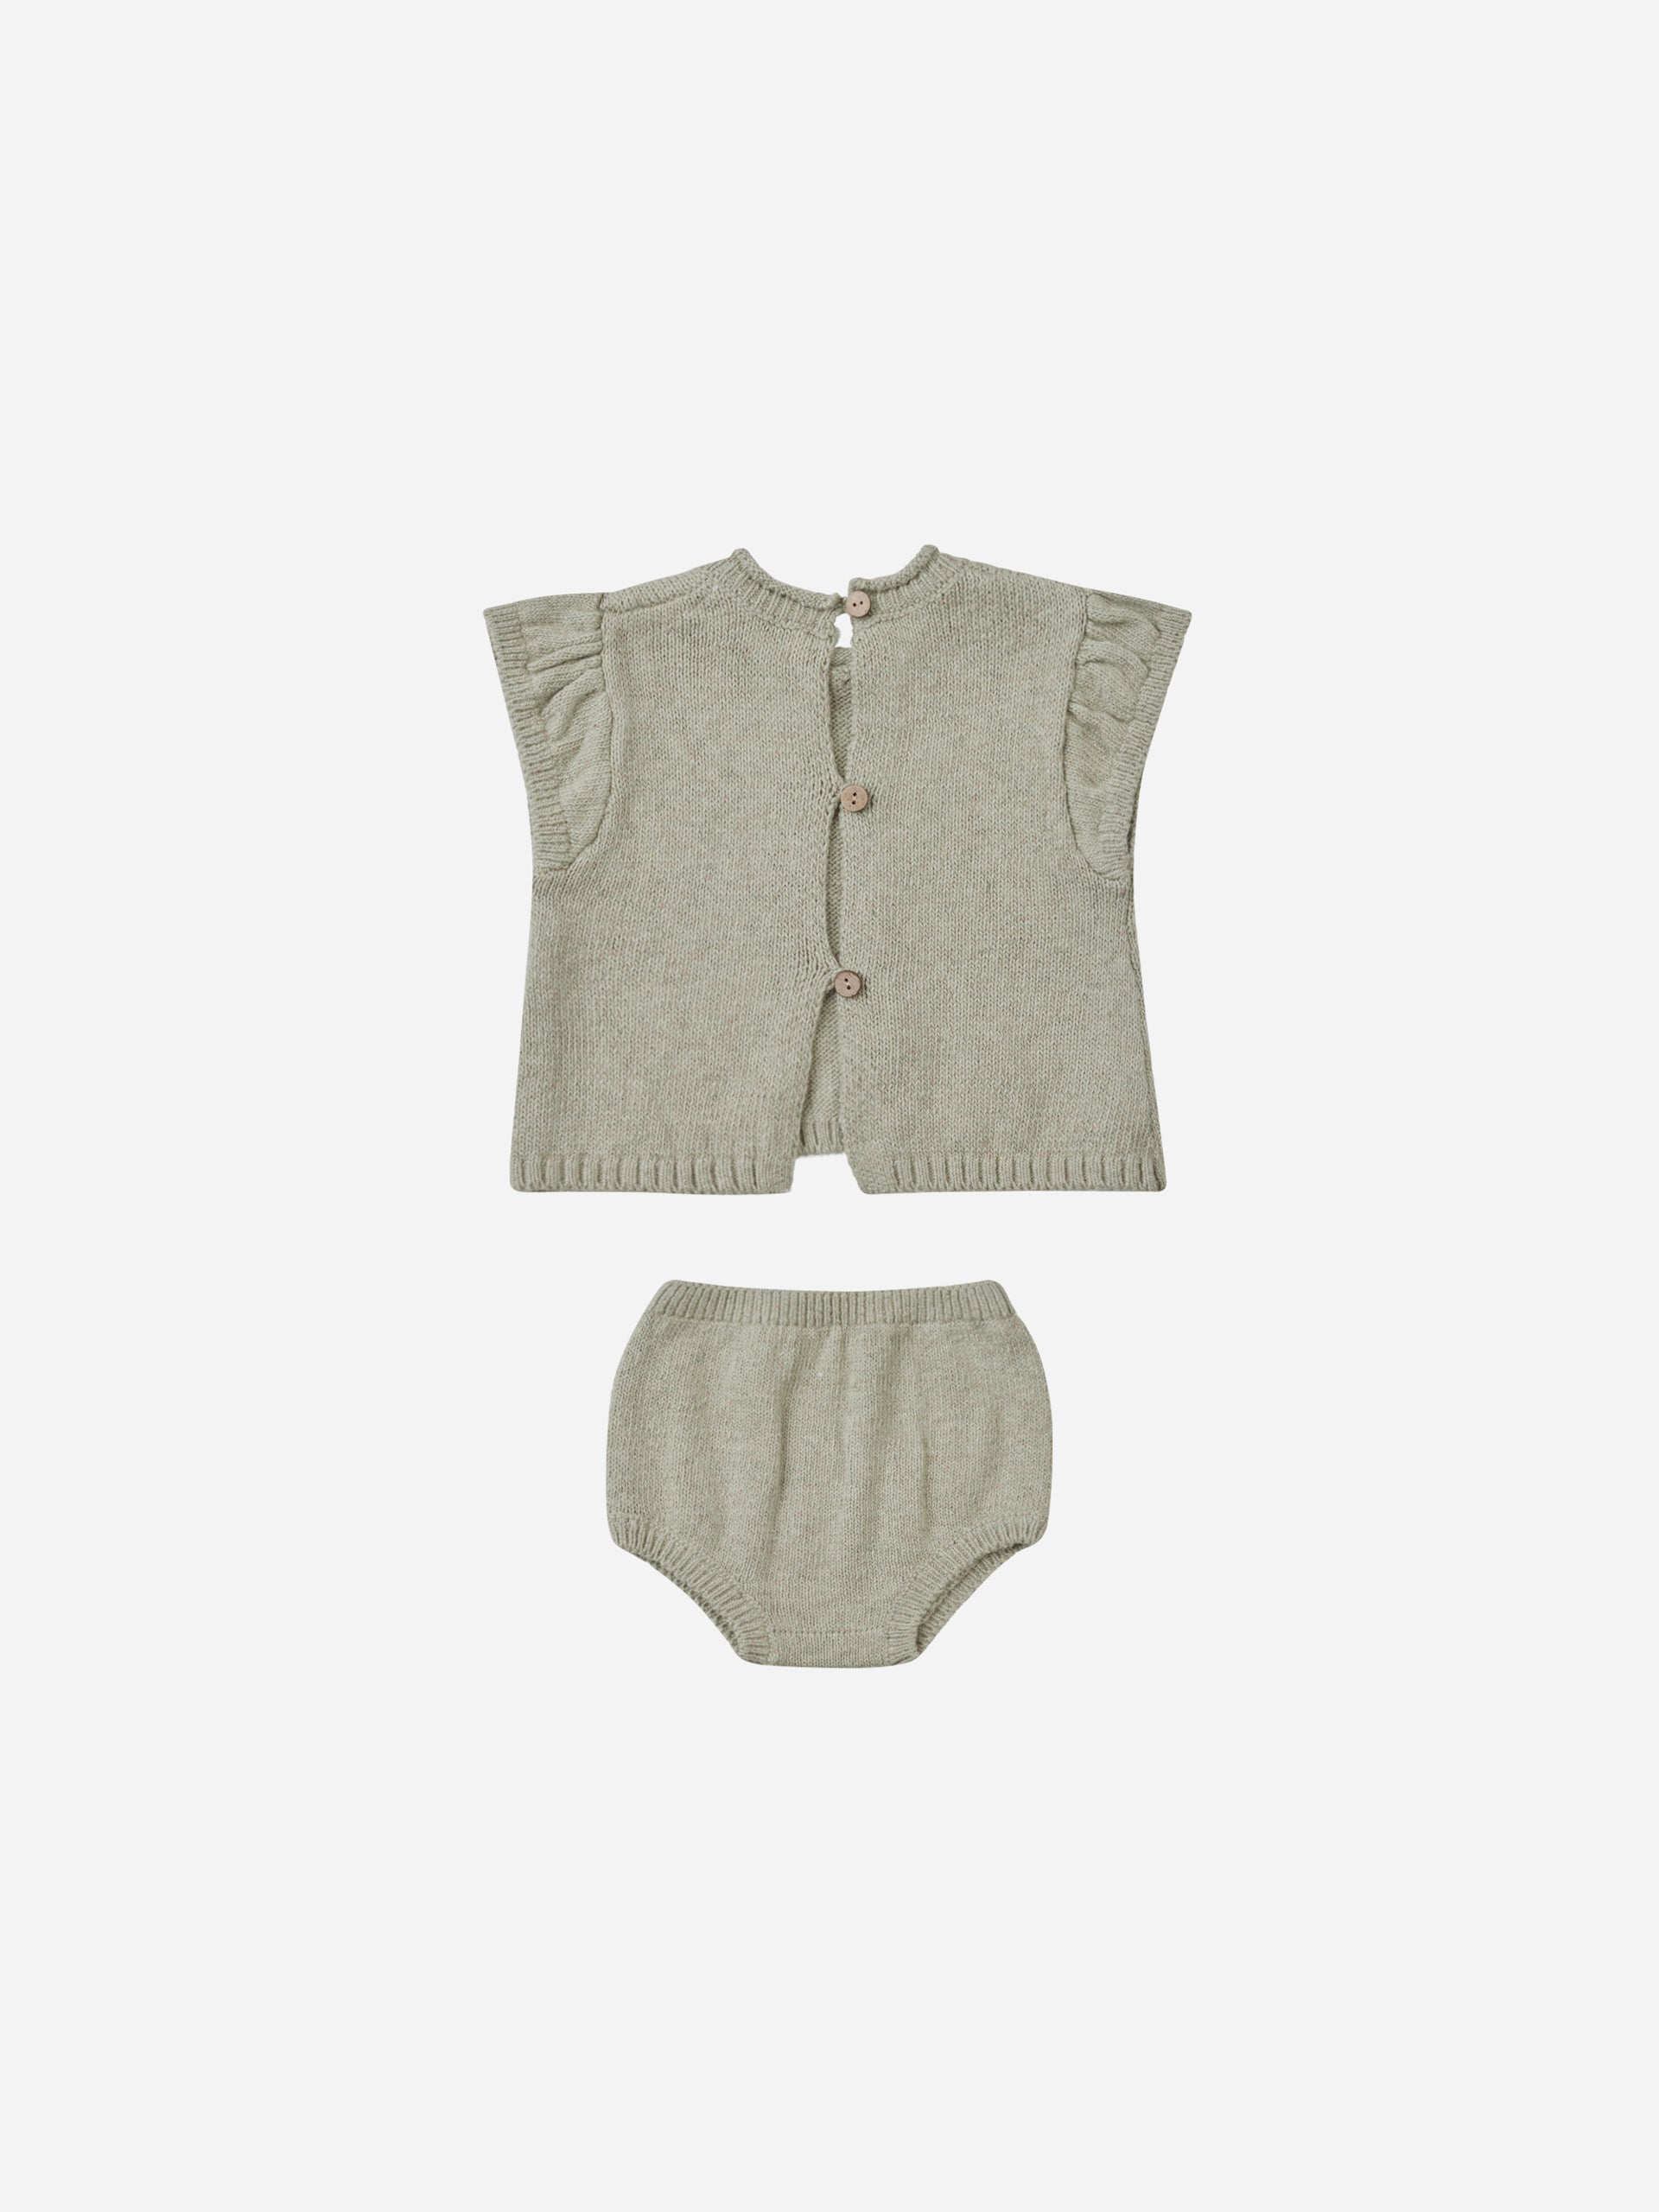 Penny Knit Set || Sage - Rylee + Cru | Kids Clothes | Trendy Baby Clothes | Modern Infant Outfits |